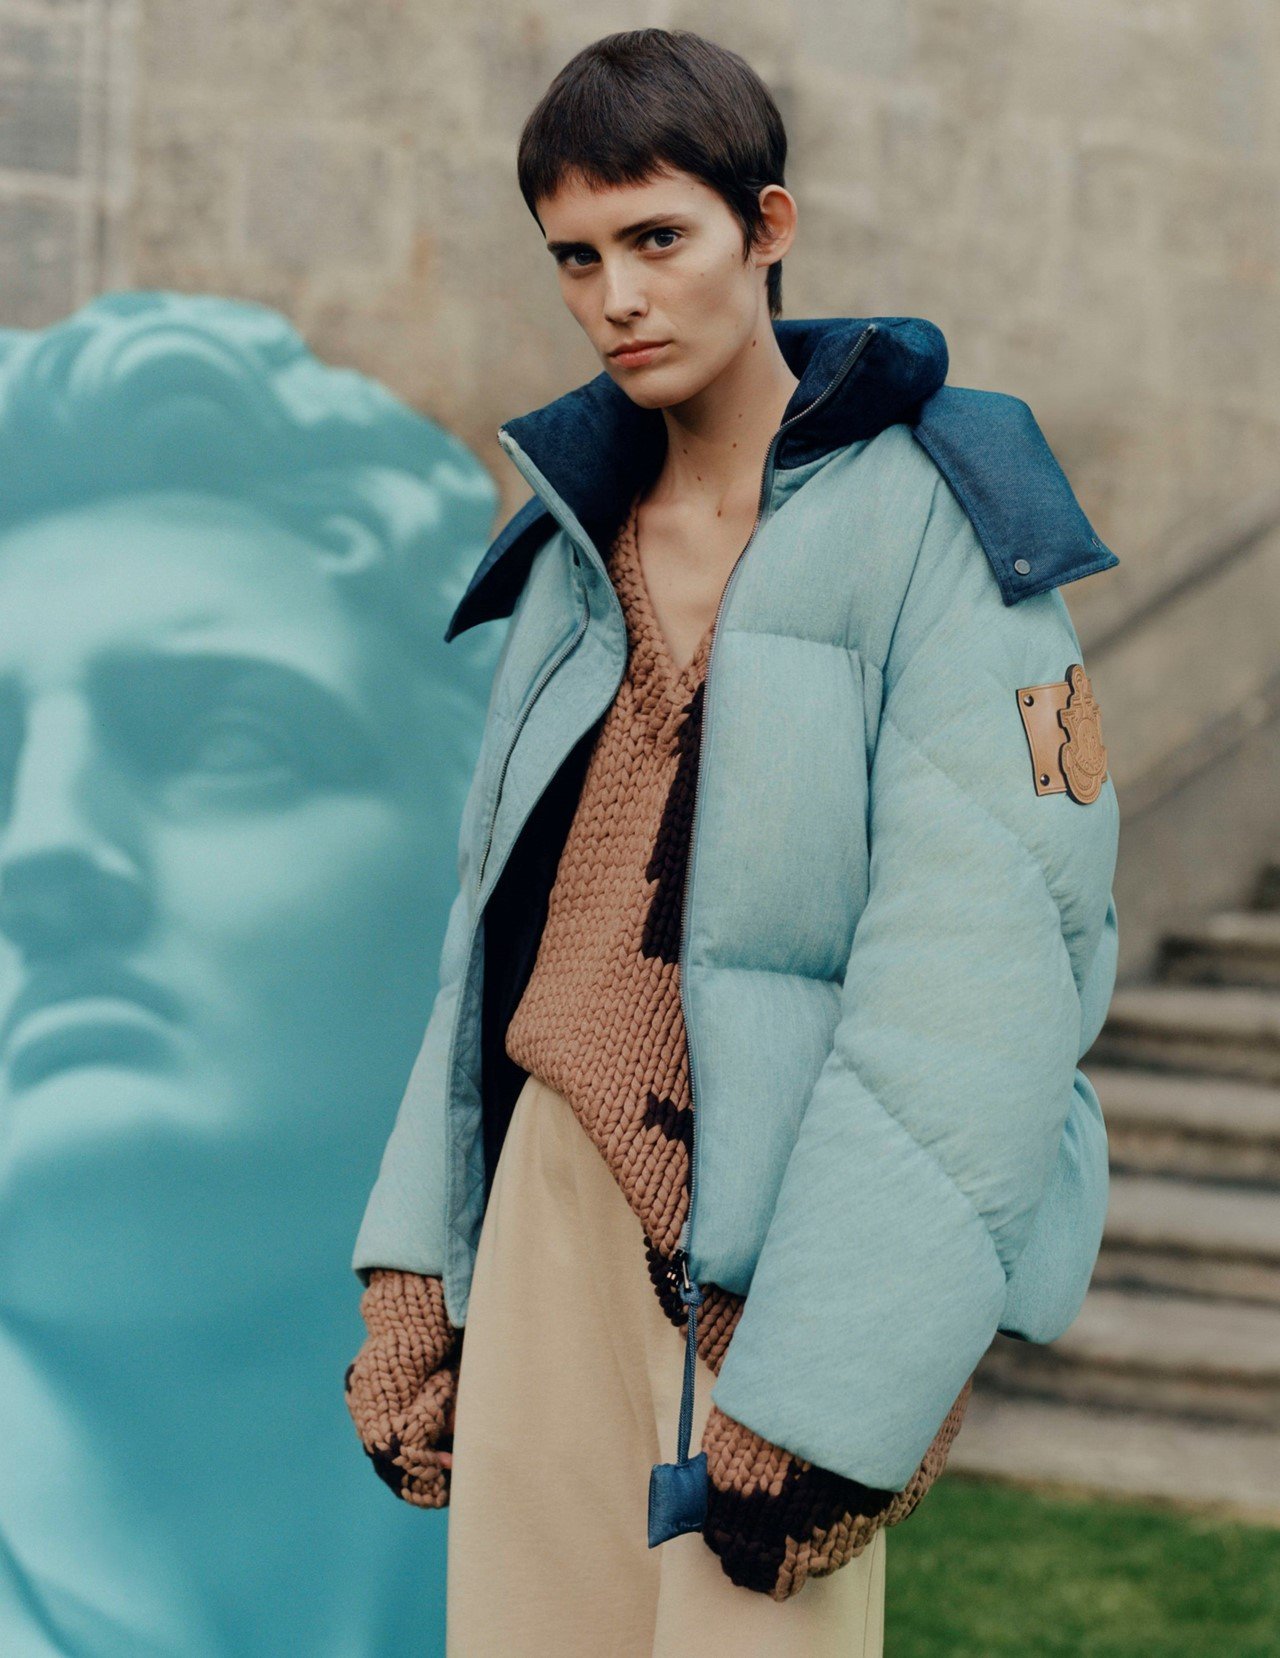 1-Moncler-JW-Anderson-by-Tyler-Mitchell (7).jpeg